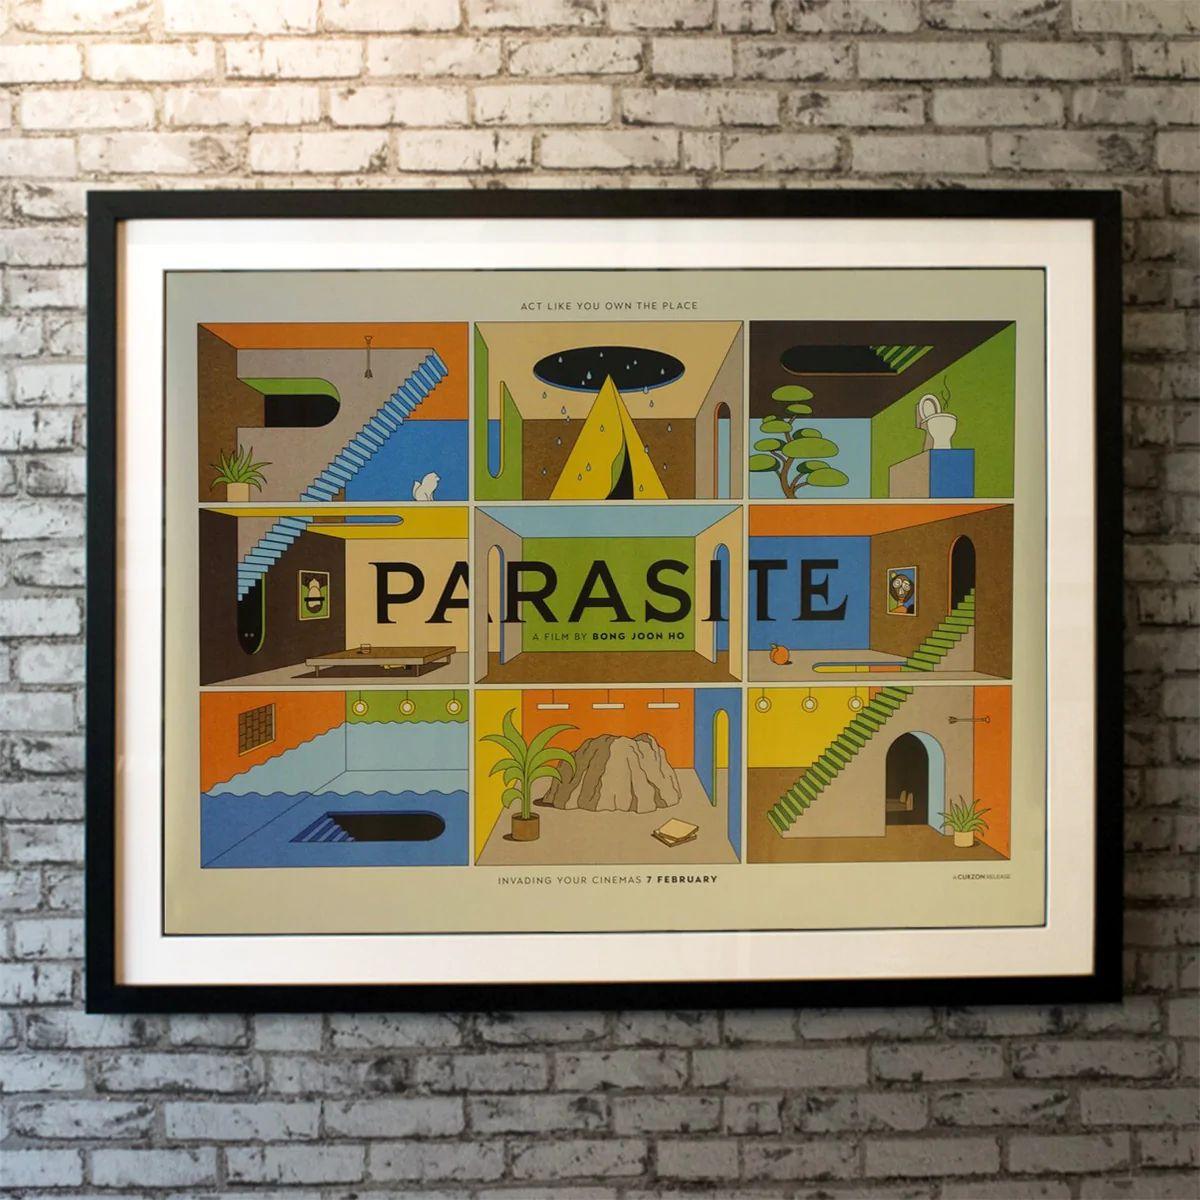 Parasite, Unframed Poster, 2020

Original British Quad (30 X 40 Inches). Greed and class discrimination threaten the newly formed symbiotic relationship between the wealthy Park family and the destitute Kim clan.

Year: 2020
Nationality: United